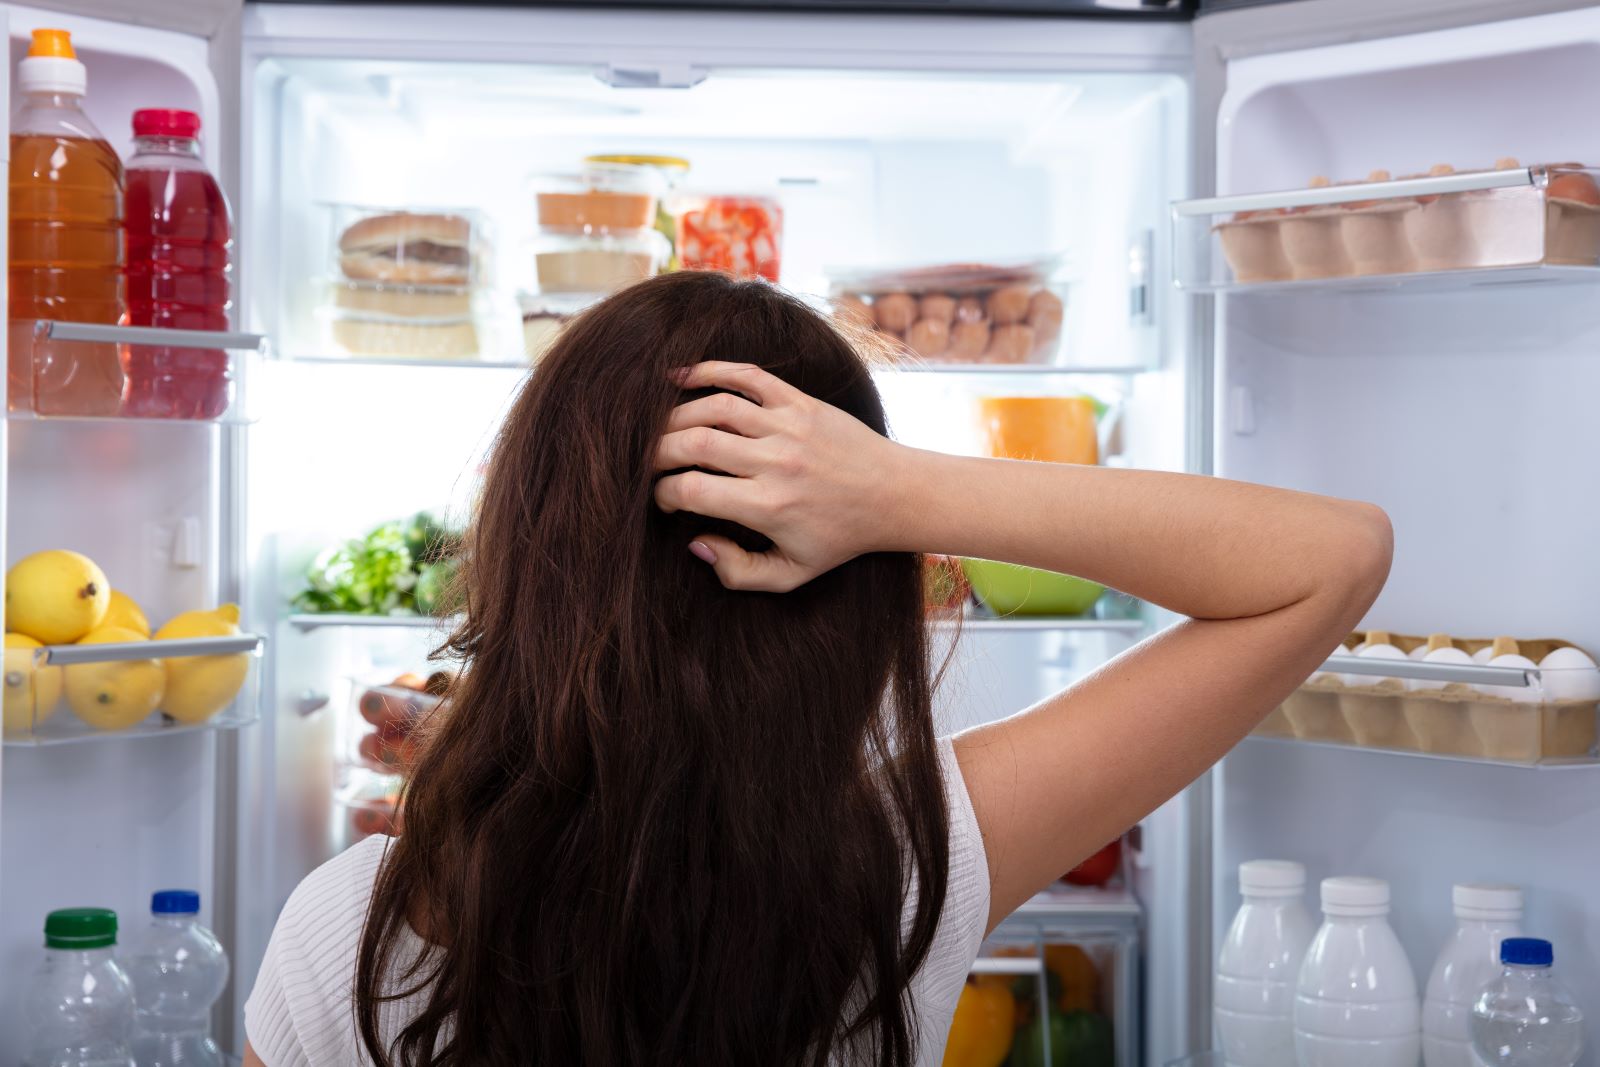 Do You Get 'Hangry?' This Might Explain Why